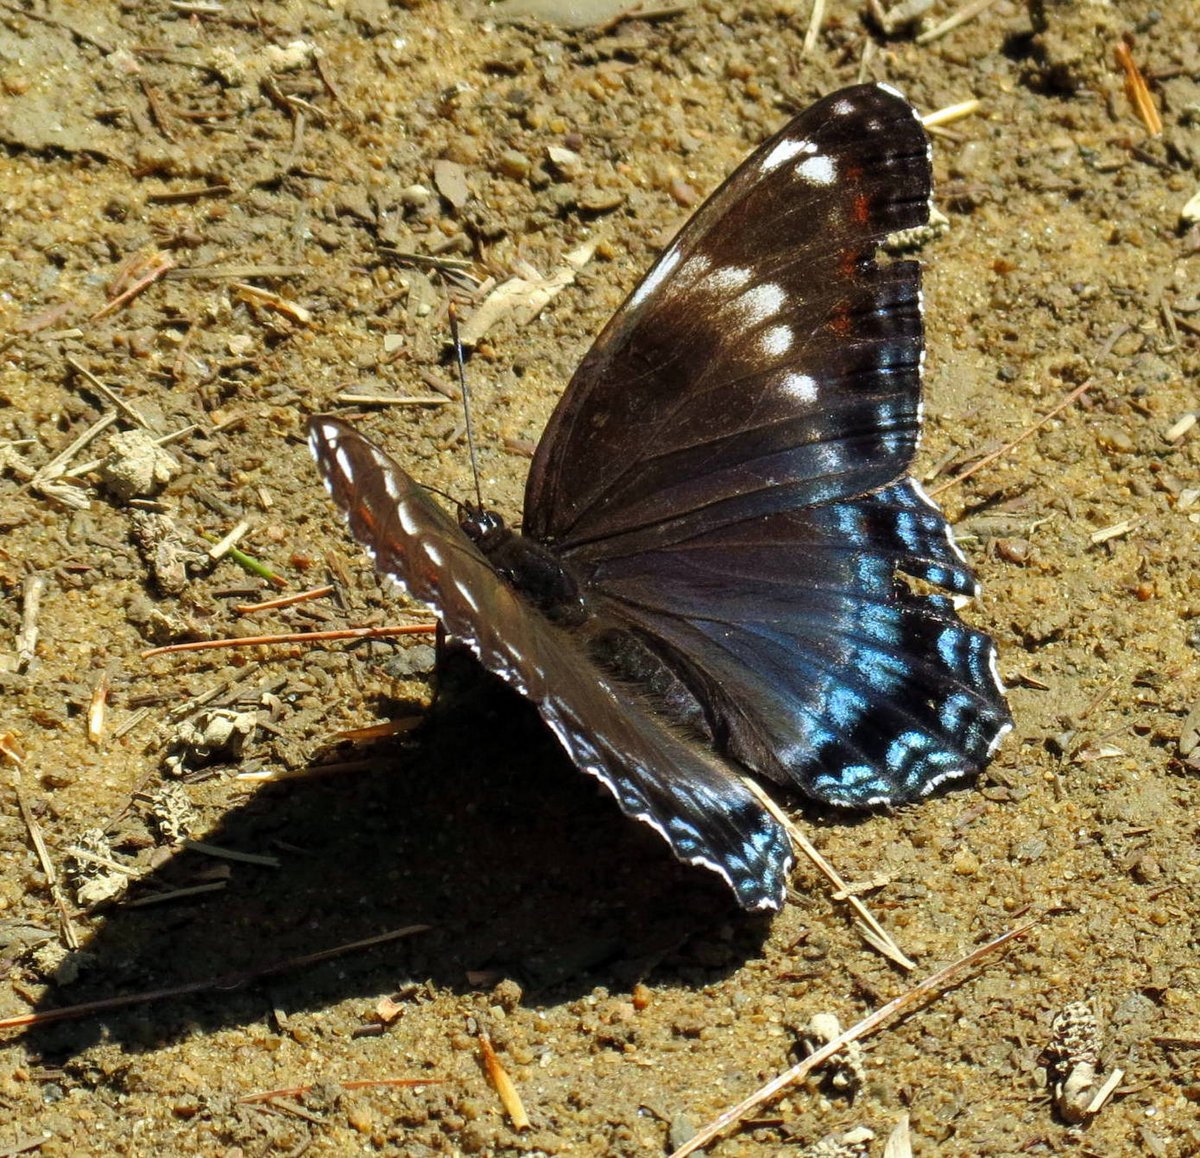 3. Red Spotted Purple Butterfly aka Limenitis arthemis astyanax